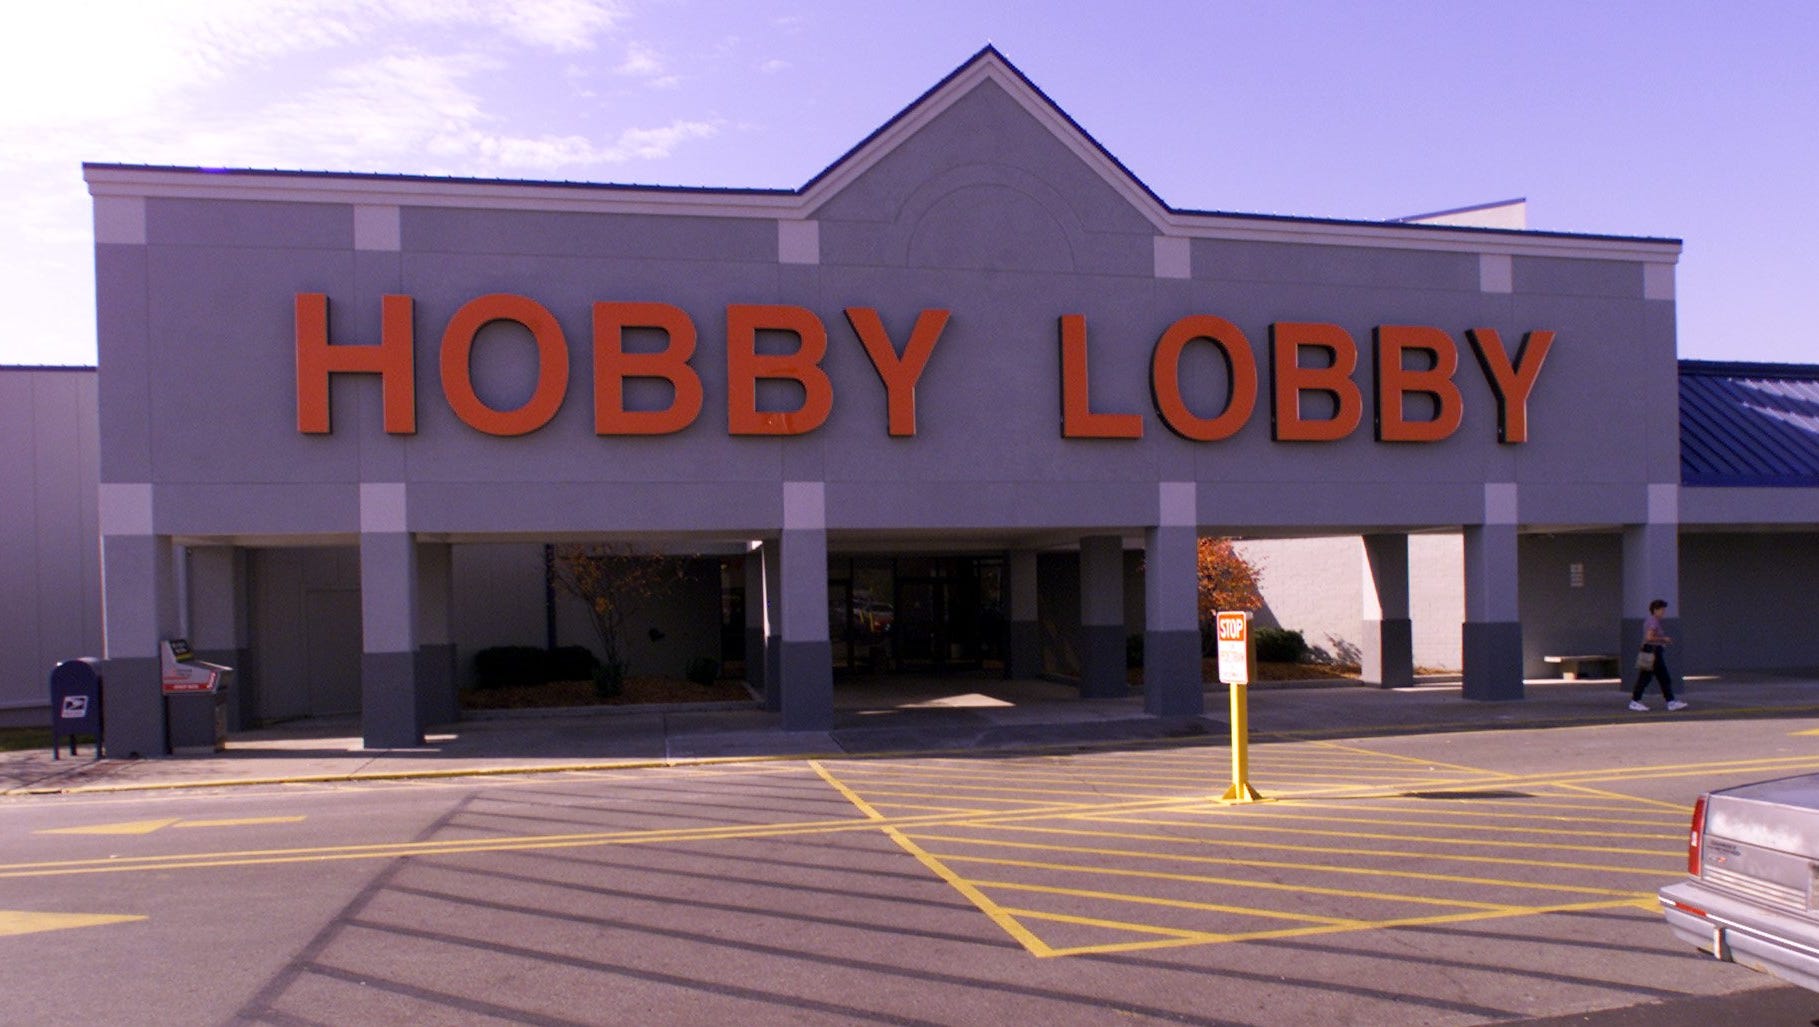 hobby lobby app used at different stores